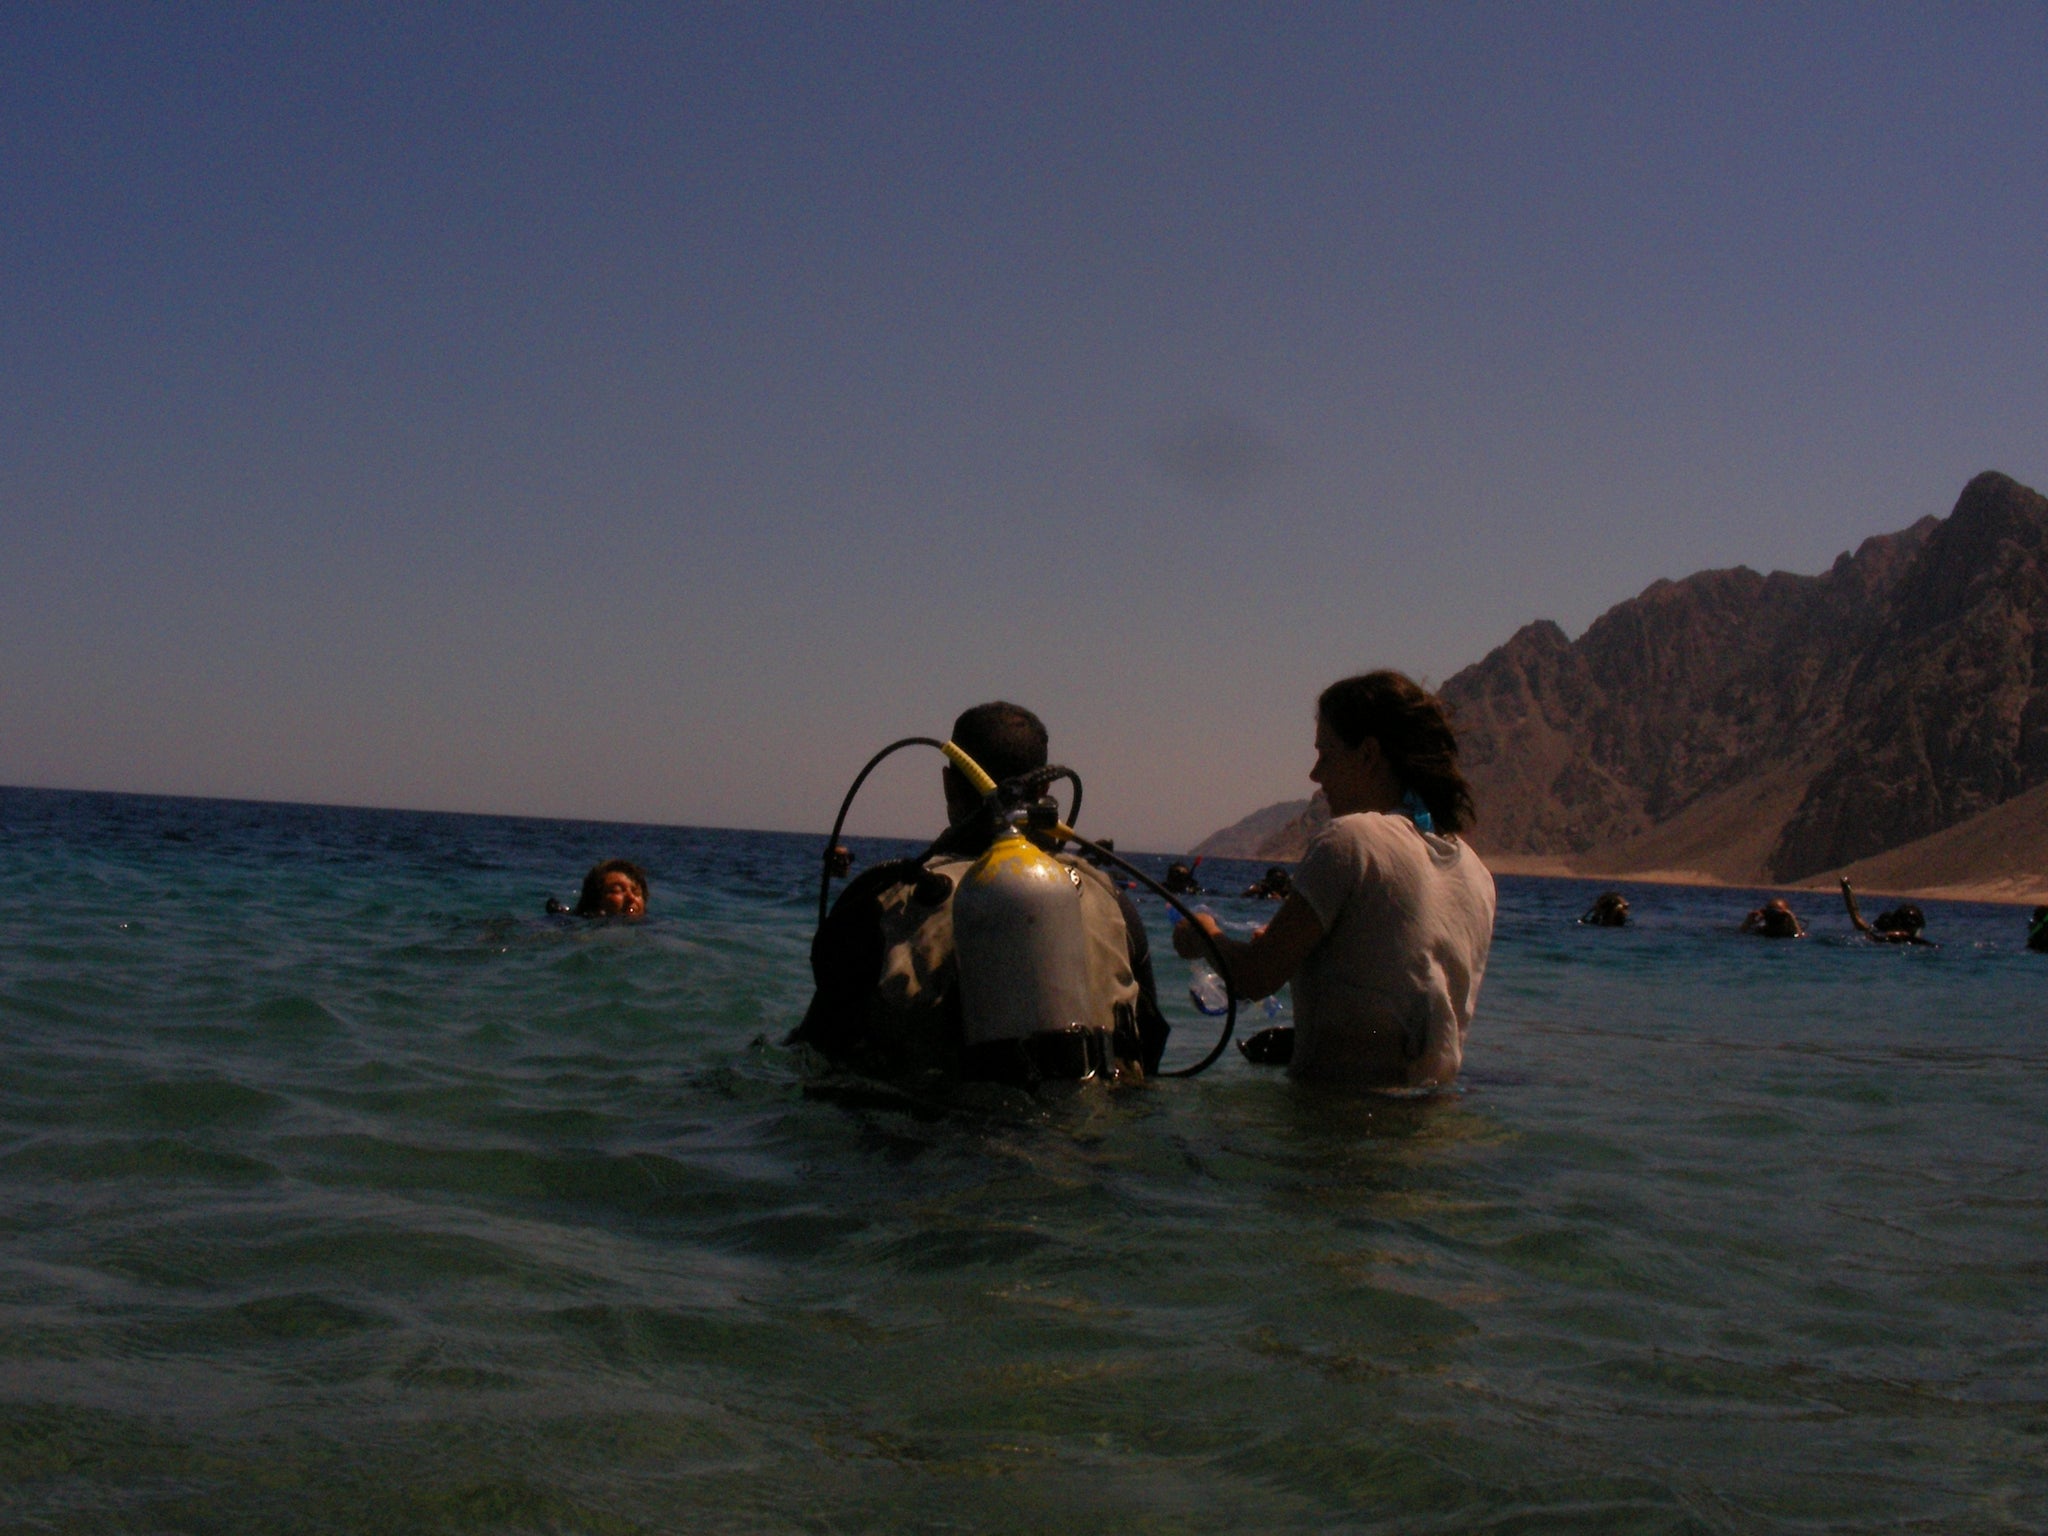 Scuba diving from the beach in Sharm El-Sheikh. A Pillowpacker® microfibre travel pillow would have been perfect to rest between dives!